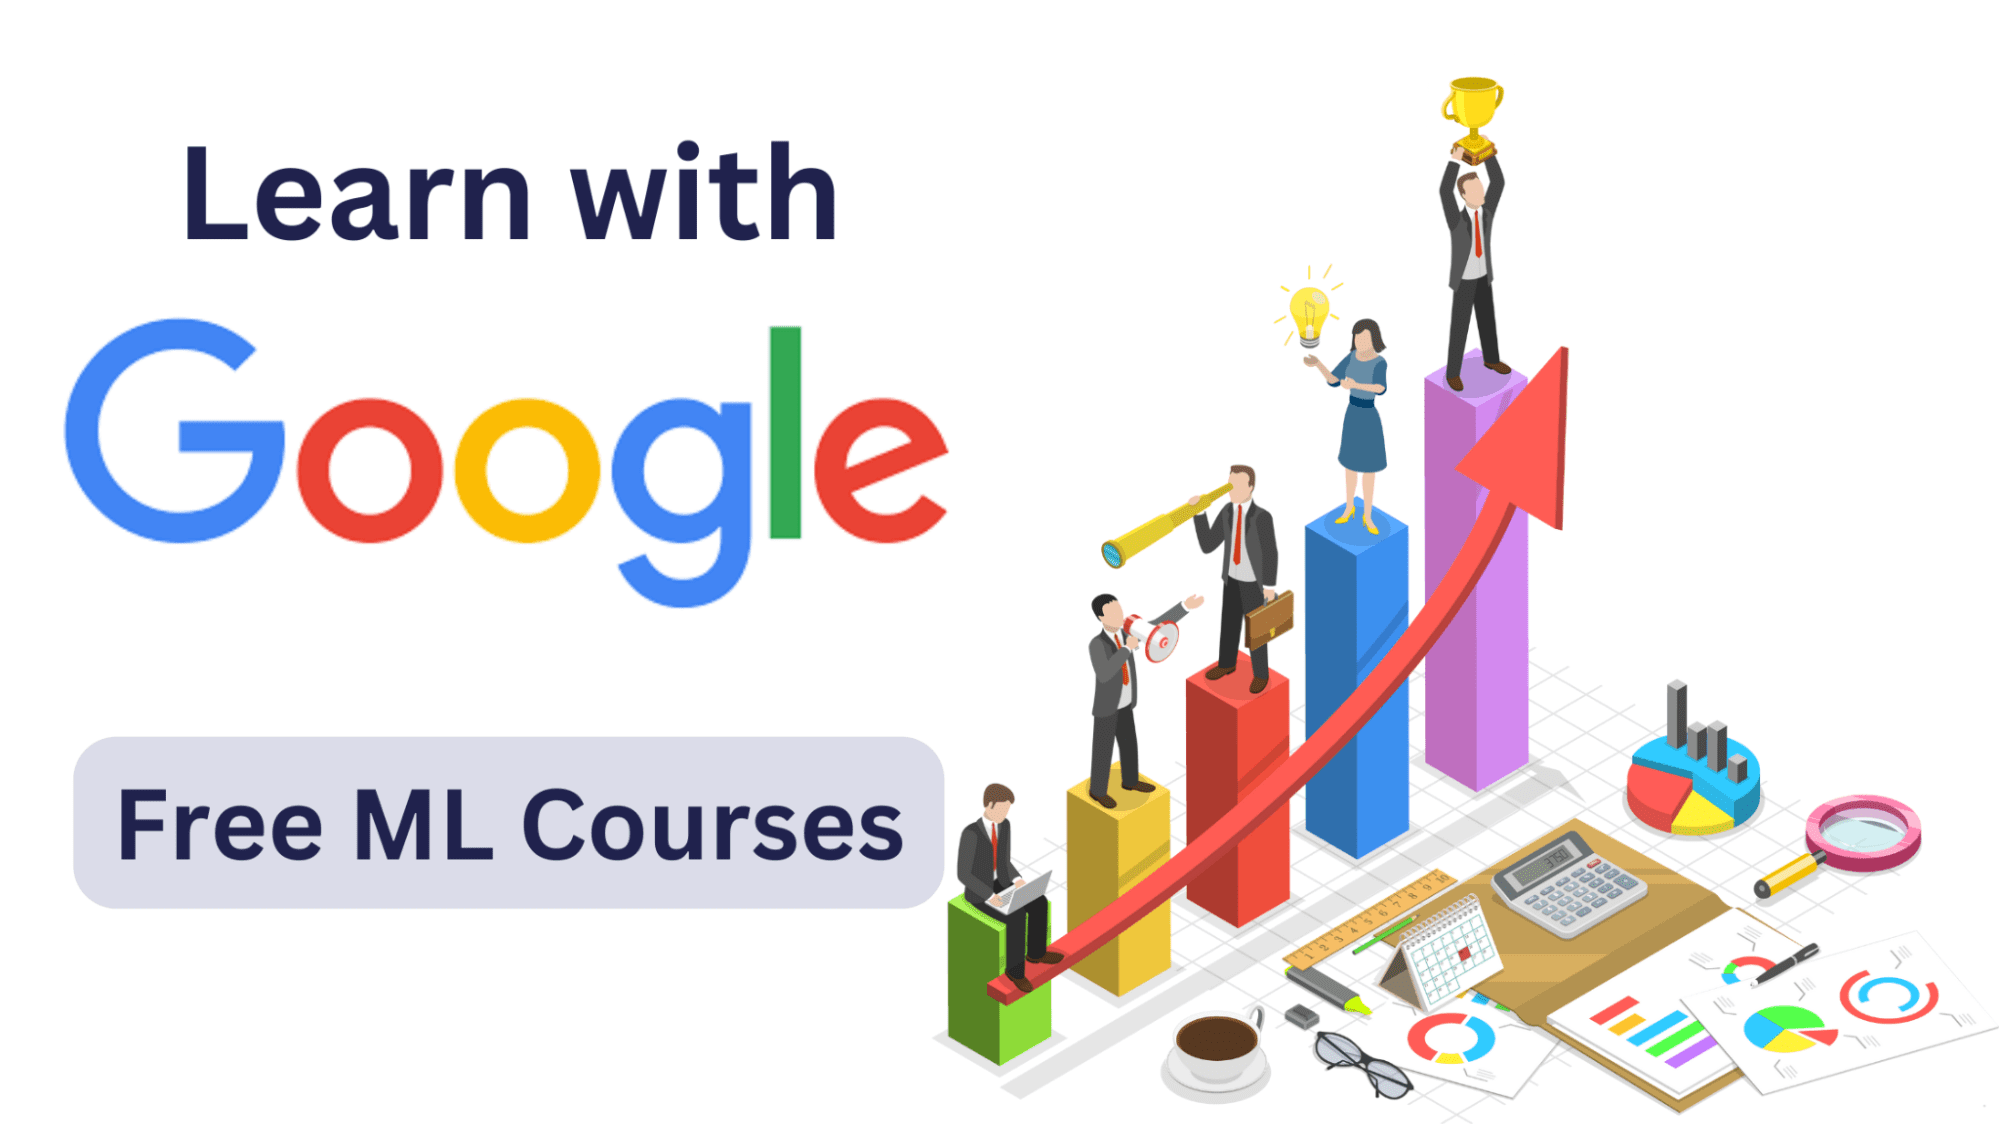 7 Free Google Courses to Become a Machine Learning Engineer